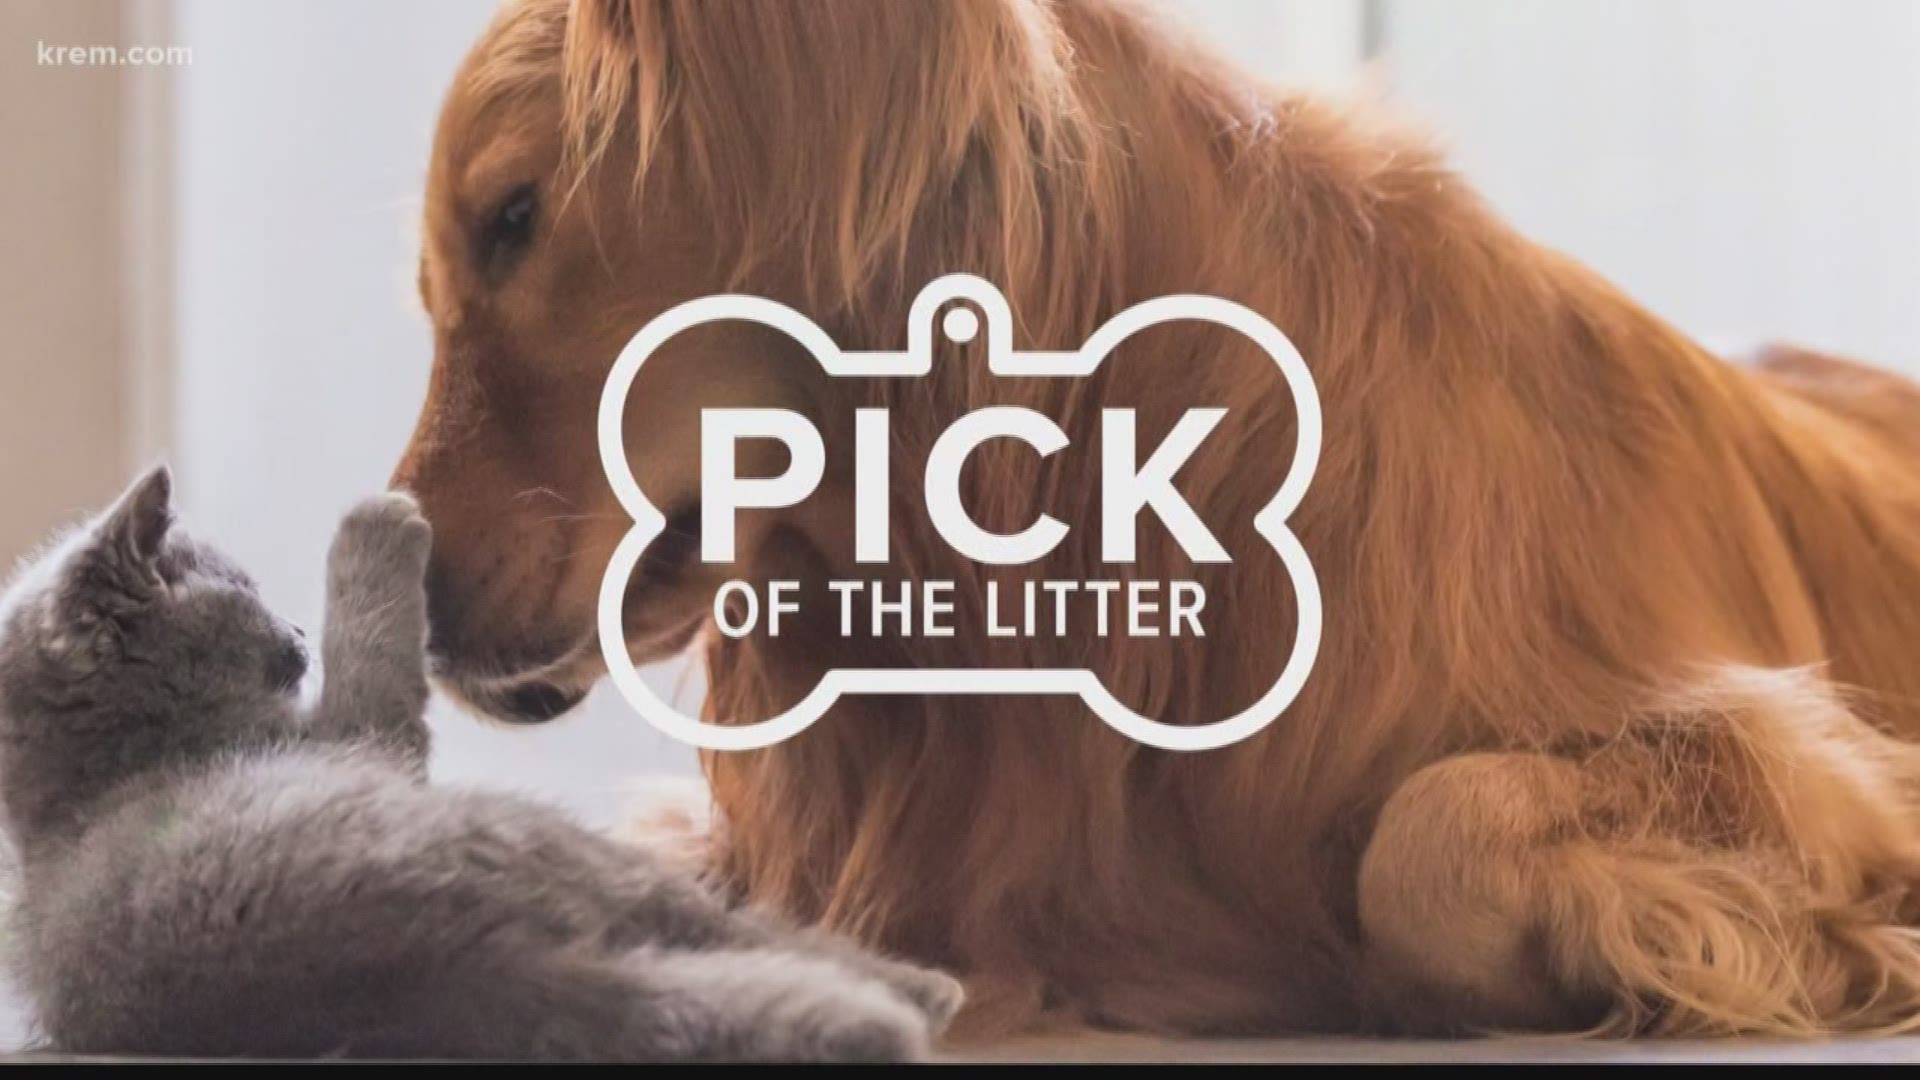 Meet this week's Pick of the Litter on Sept. 3, 2019!